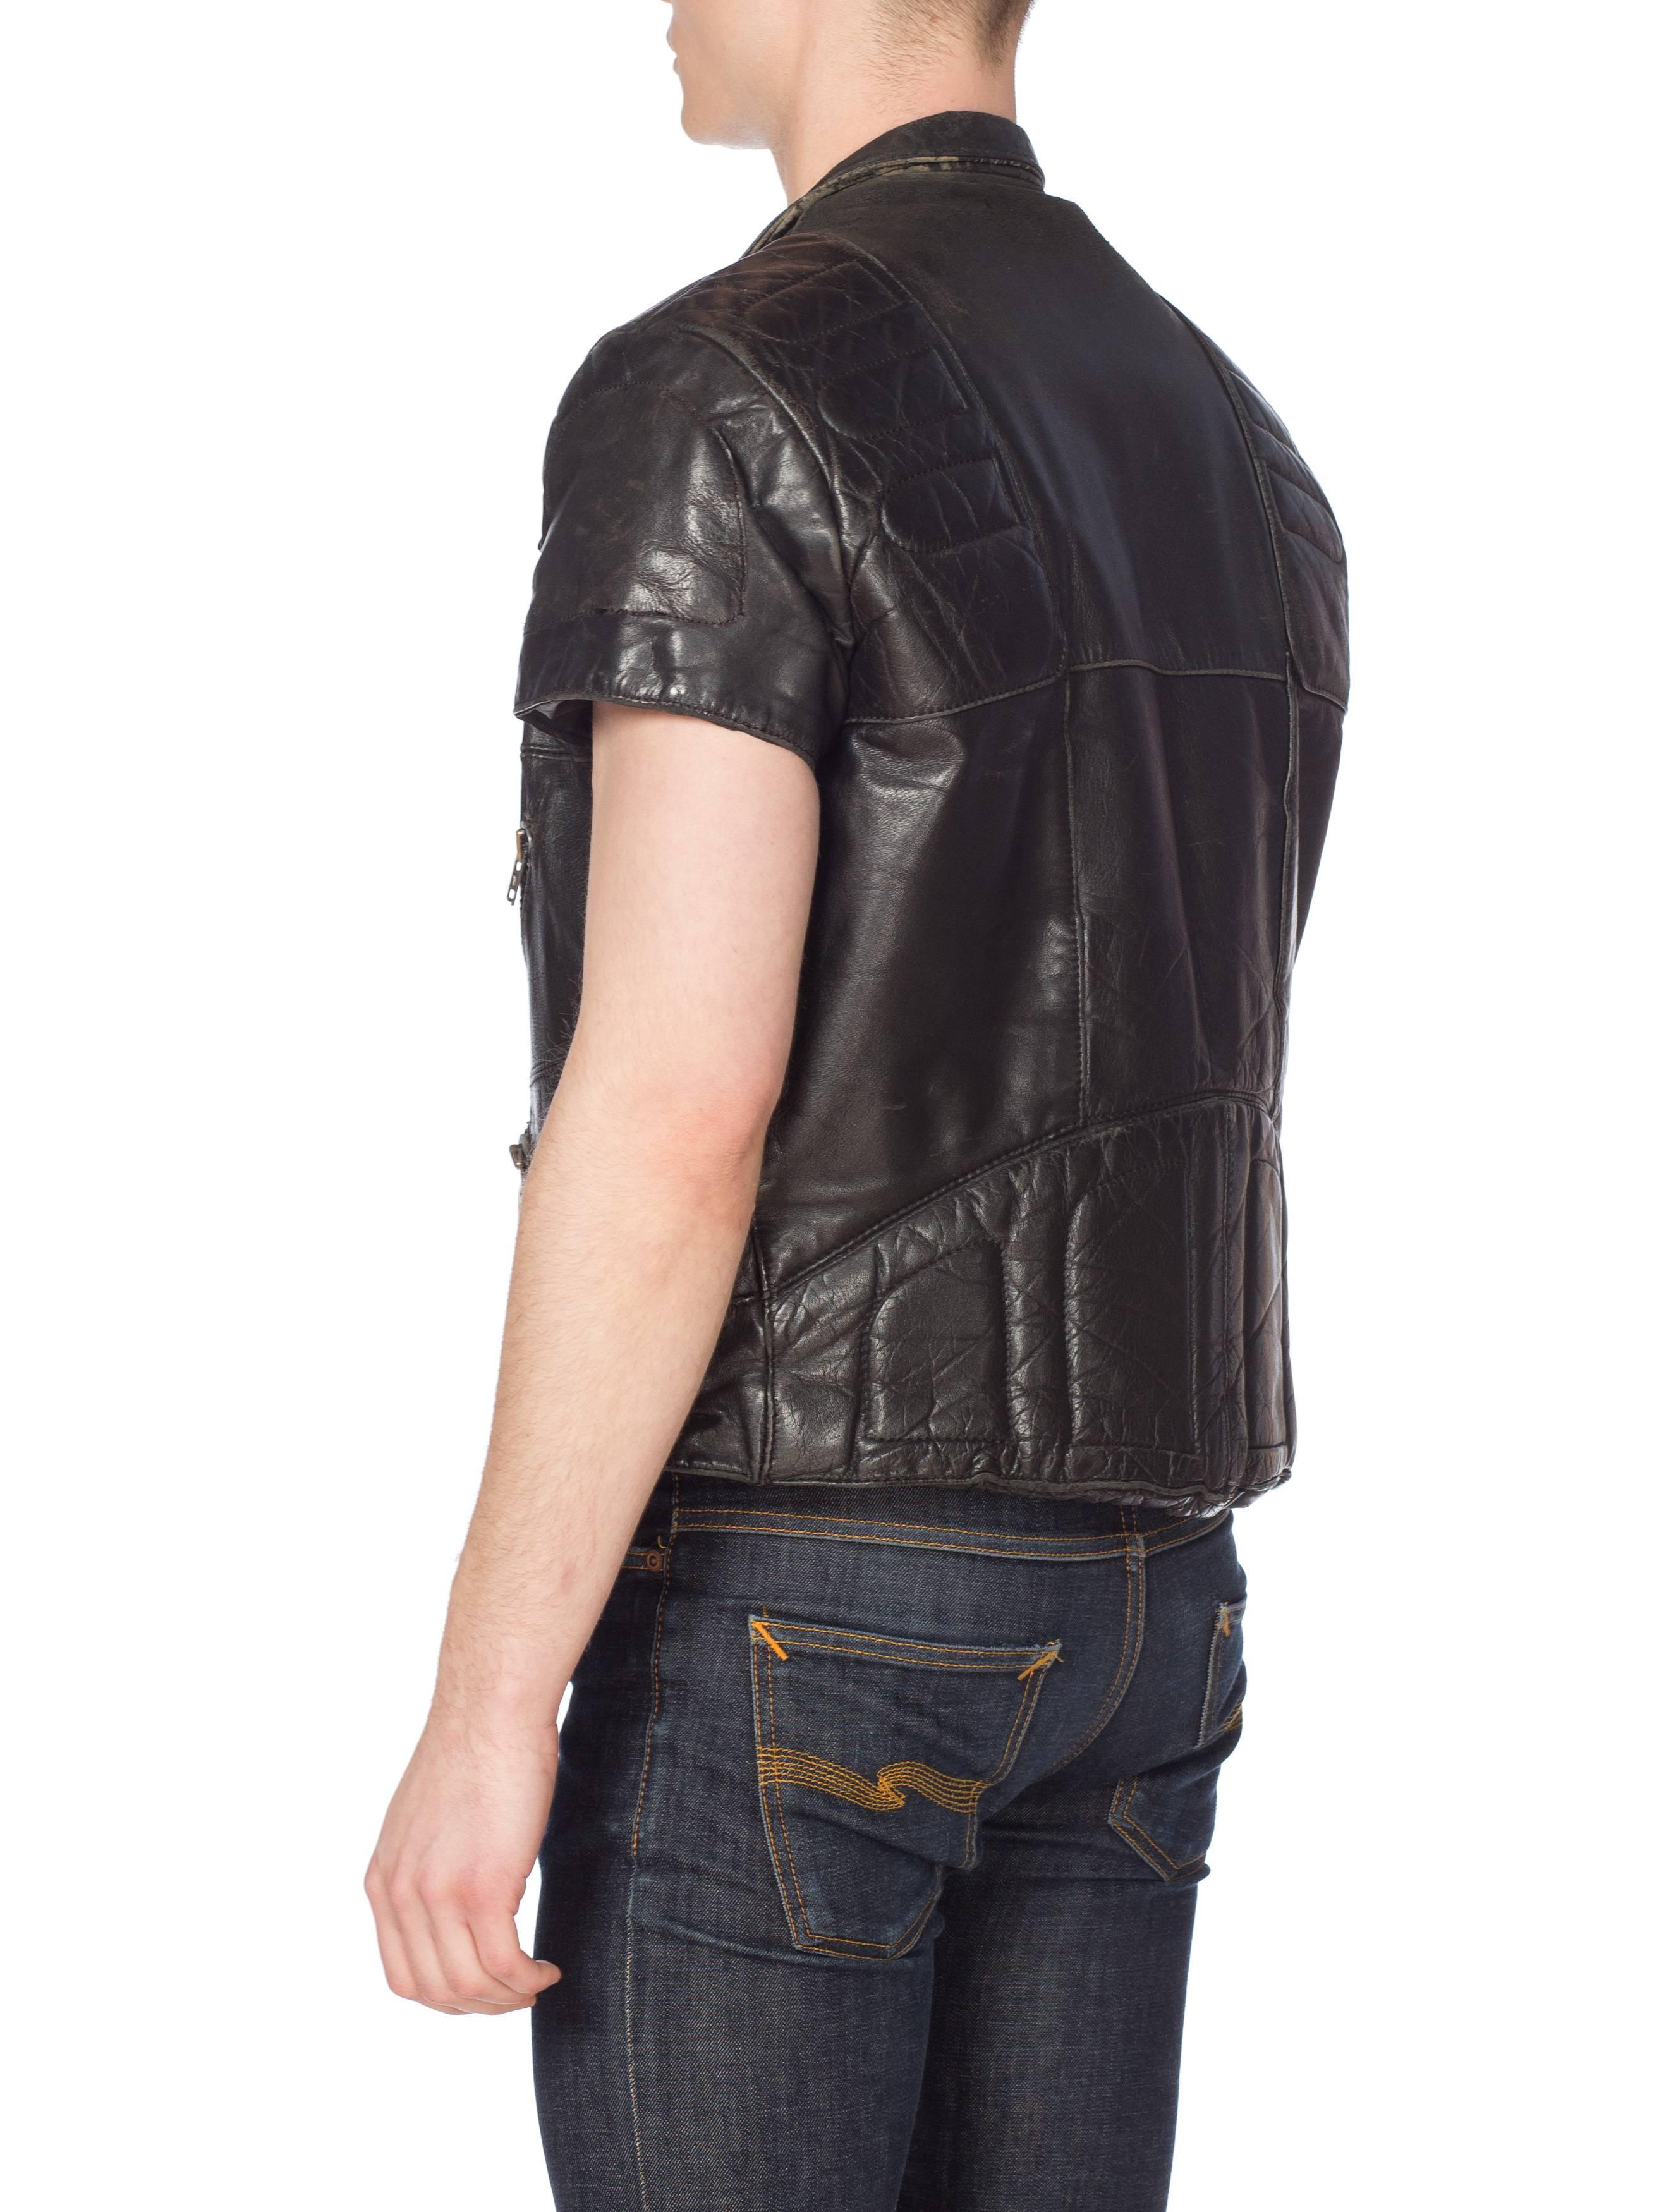 Mens Cropped Sleeve Leather Biker Jacket Formerly Belonging to the Band Justice 4